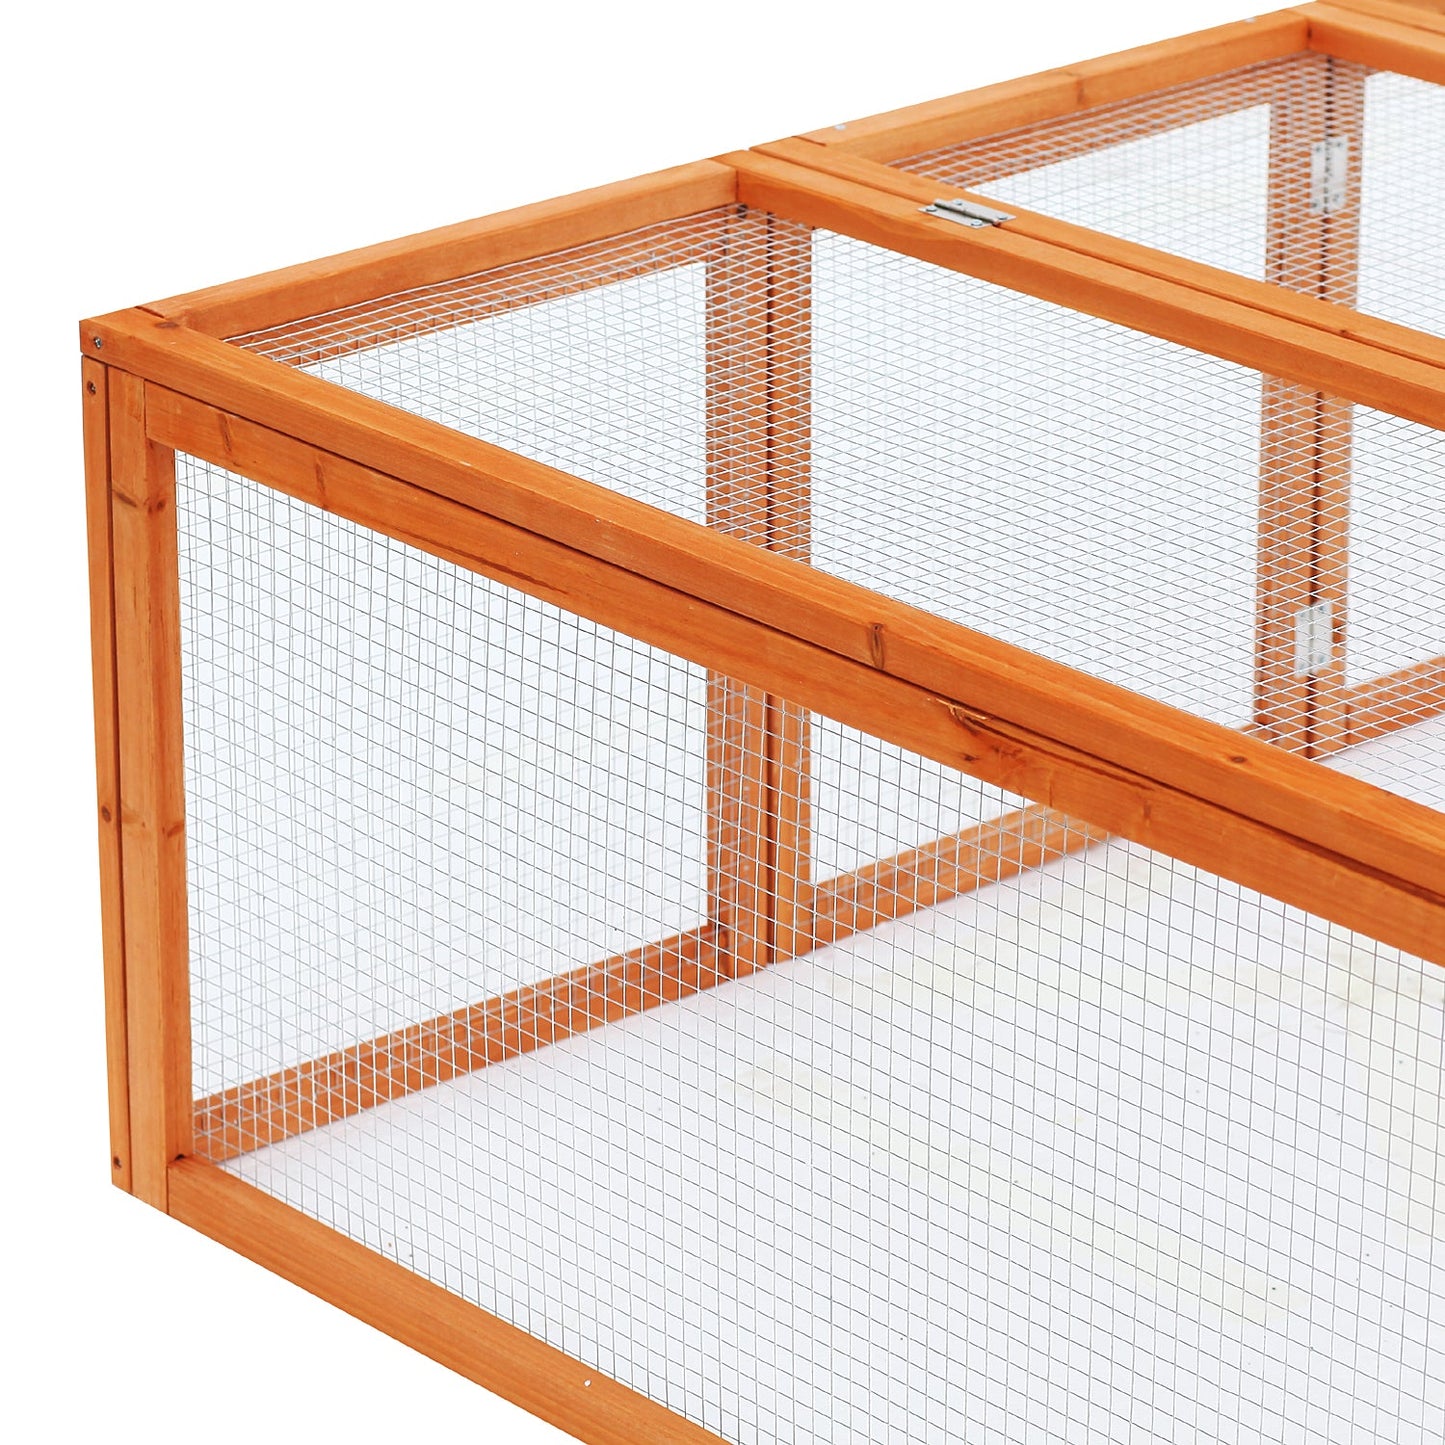 Pawhut Wooden Rabbit Hutch Outdoor, Guinea Pig Hutch, Bunny Cage with Wire Mesh Safety Rabbit Run and Play Space 181 x 100 x 48 cm